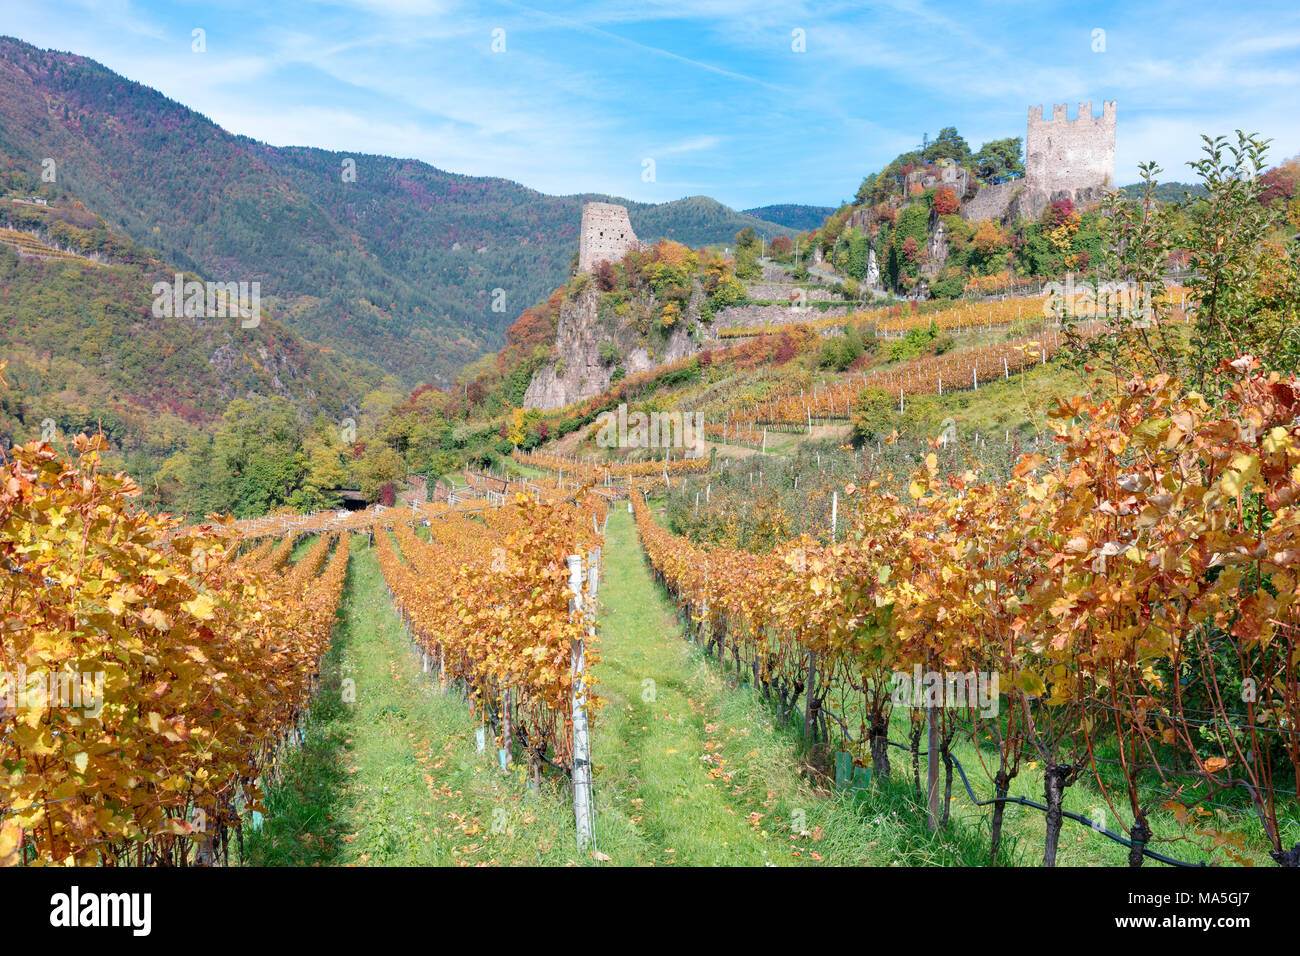 View of Cembra Valley in autumn and Segonzano Castle, Trentino District, Italy Stock Photo